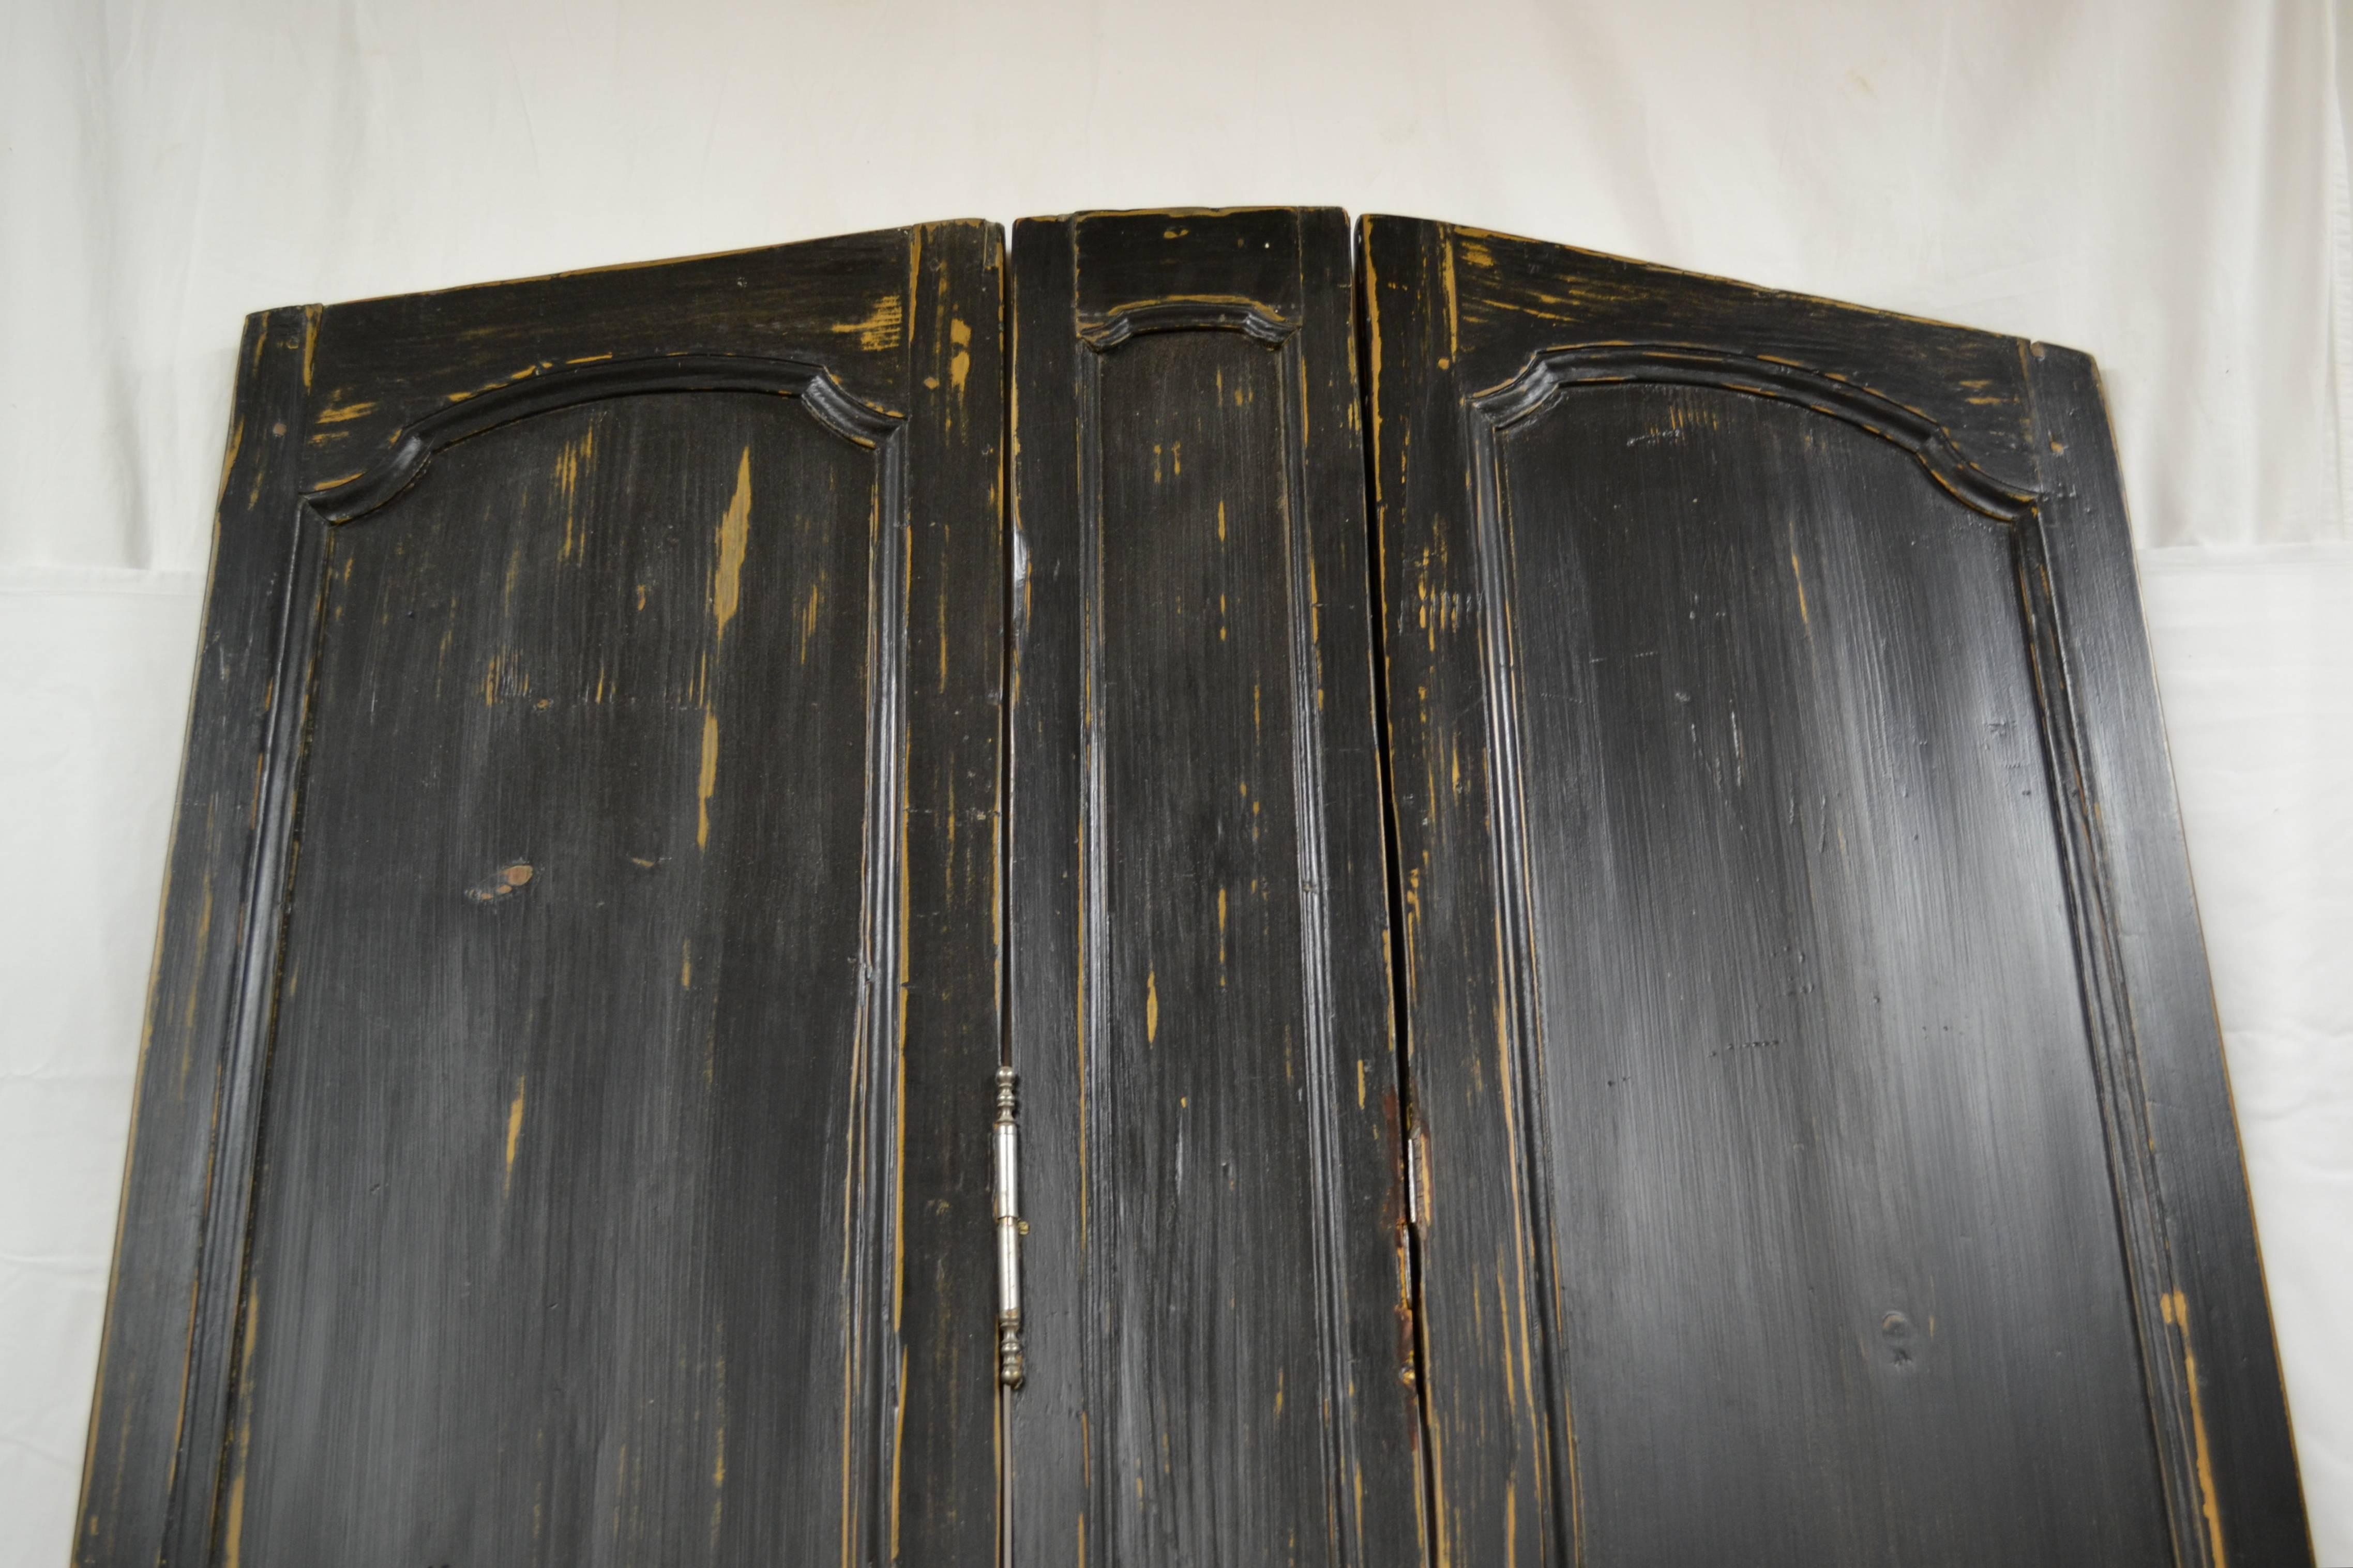 Three mid-19th century French Louis XV style pine wall panels have been joined with steel fiche hinges to form this arched-top folding screen. A central strip, 7.5” wide, stands between two 16” wide panels, one folding forwards, one folding back.